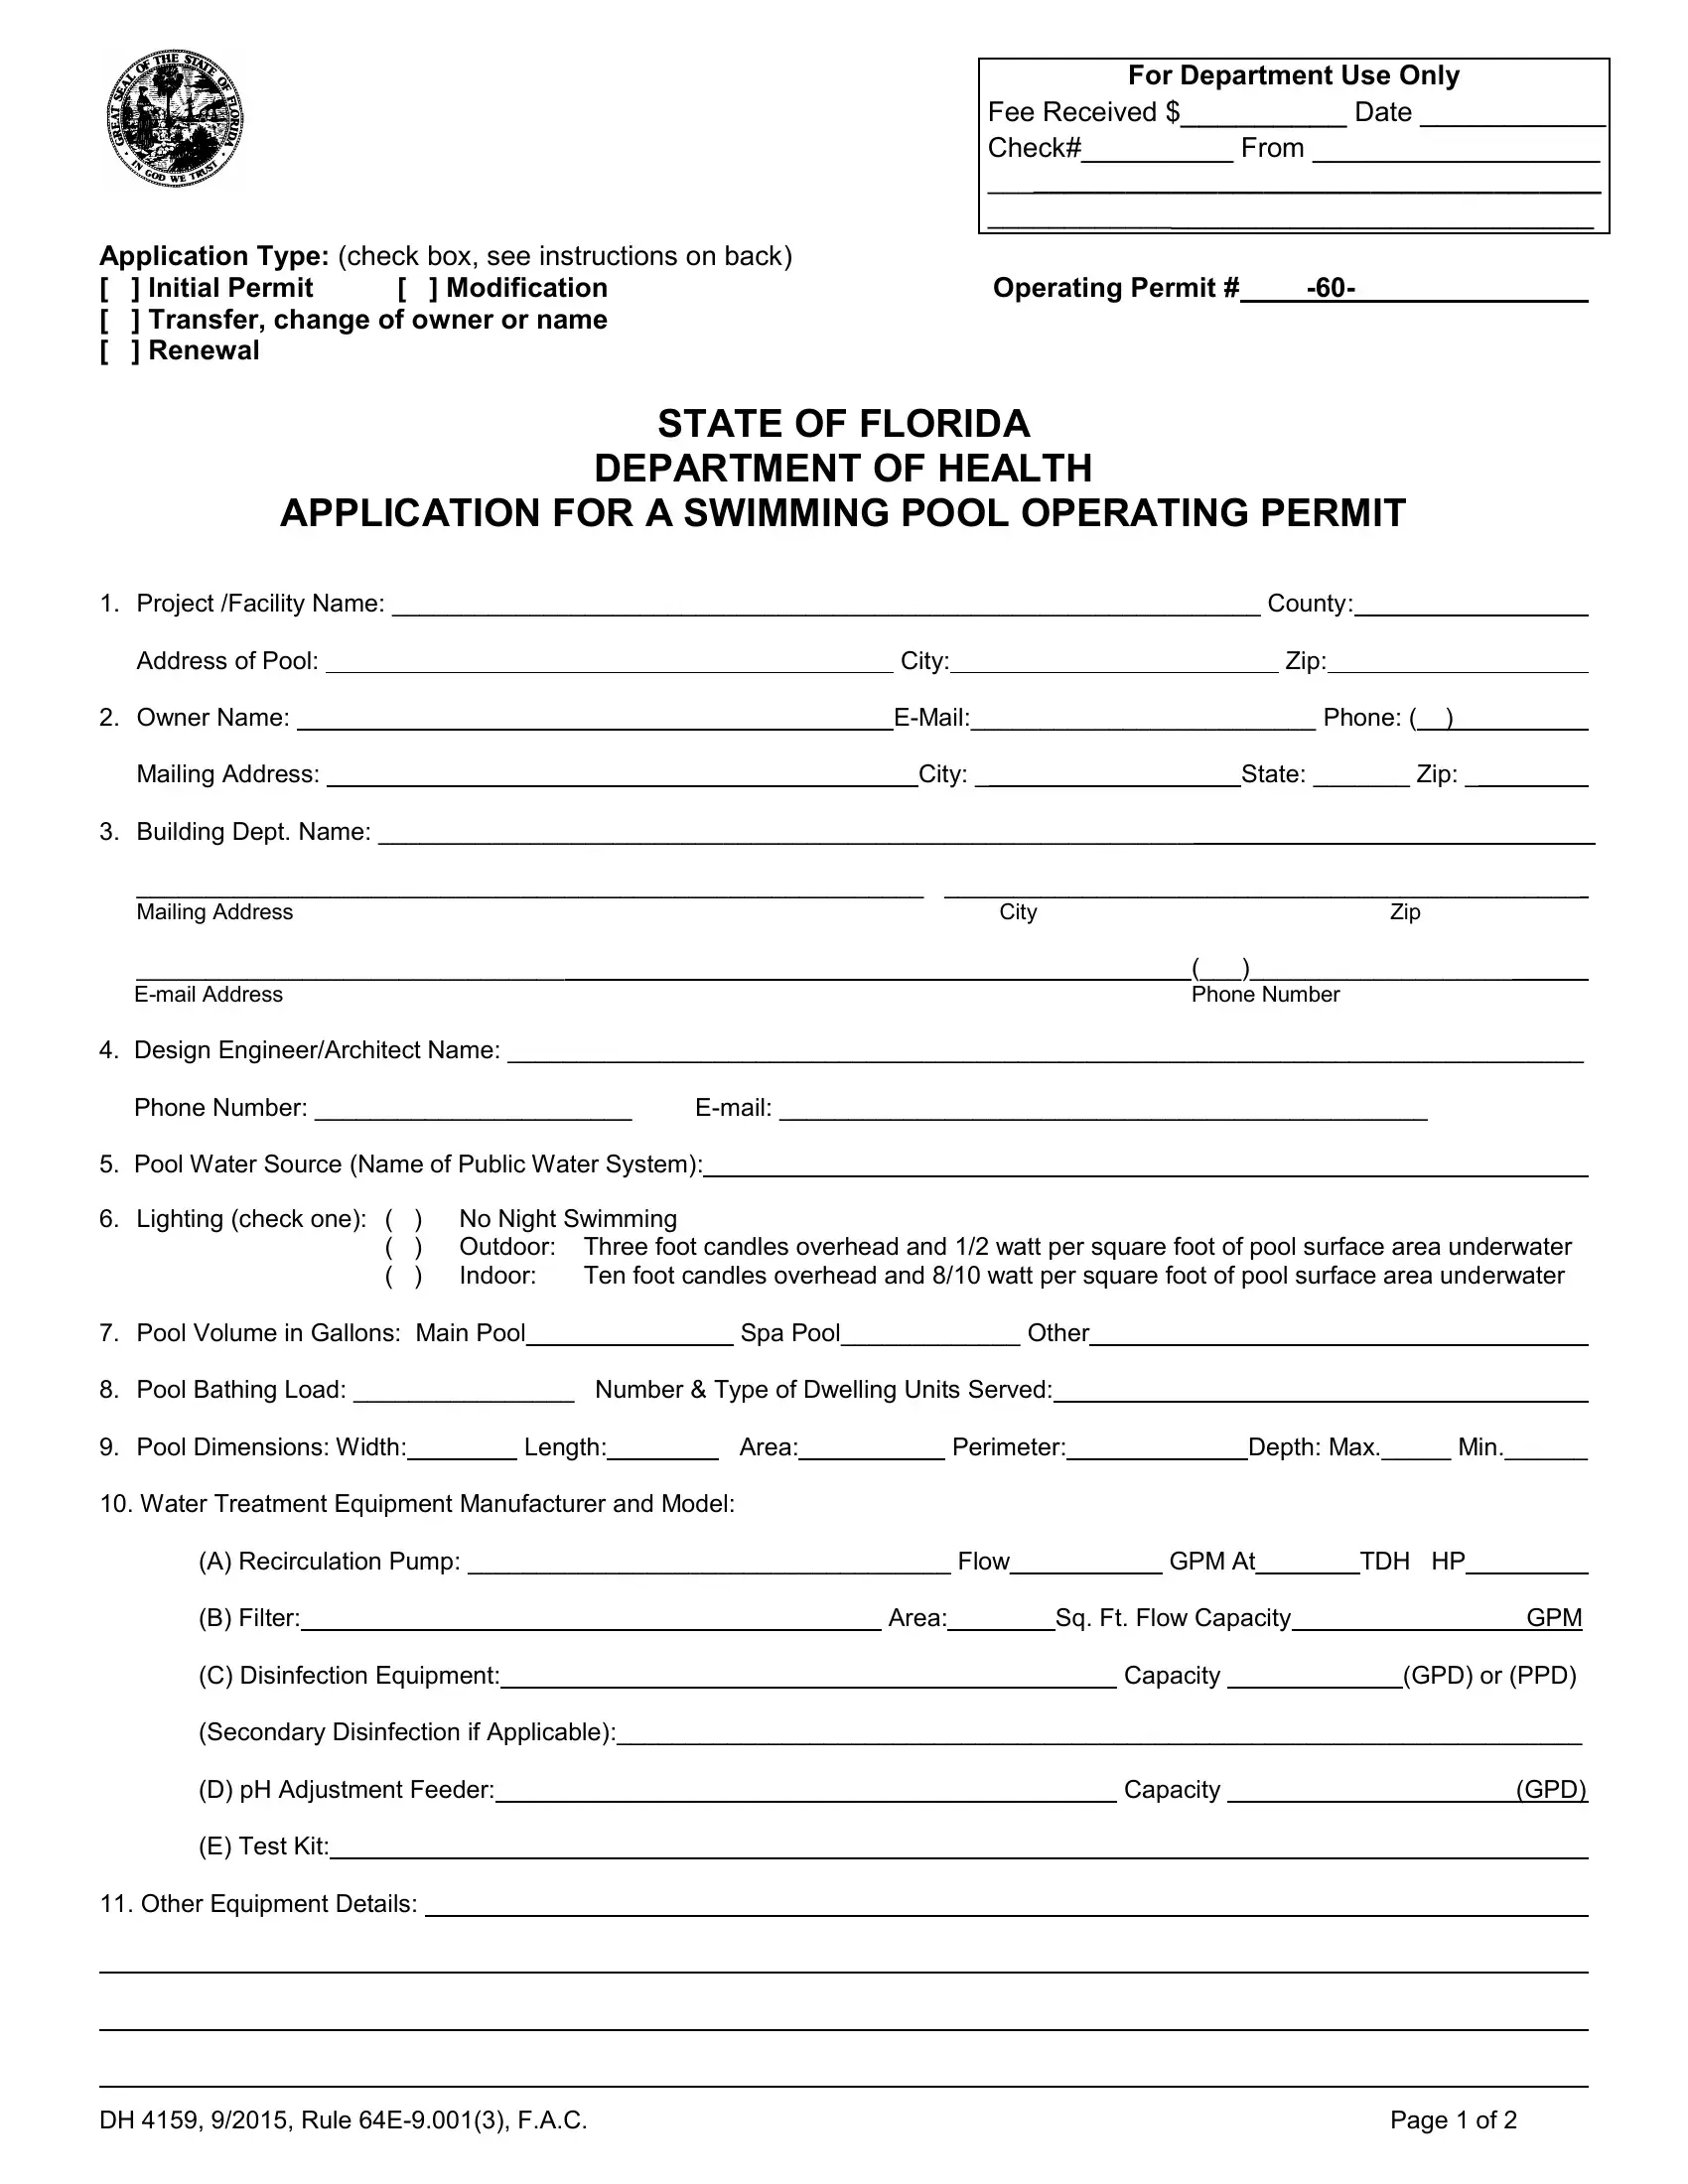 dh-4159-form-fill-out-printable-pdf-forms-online